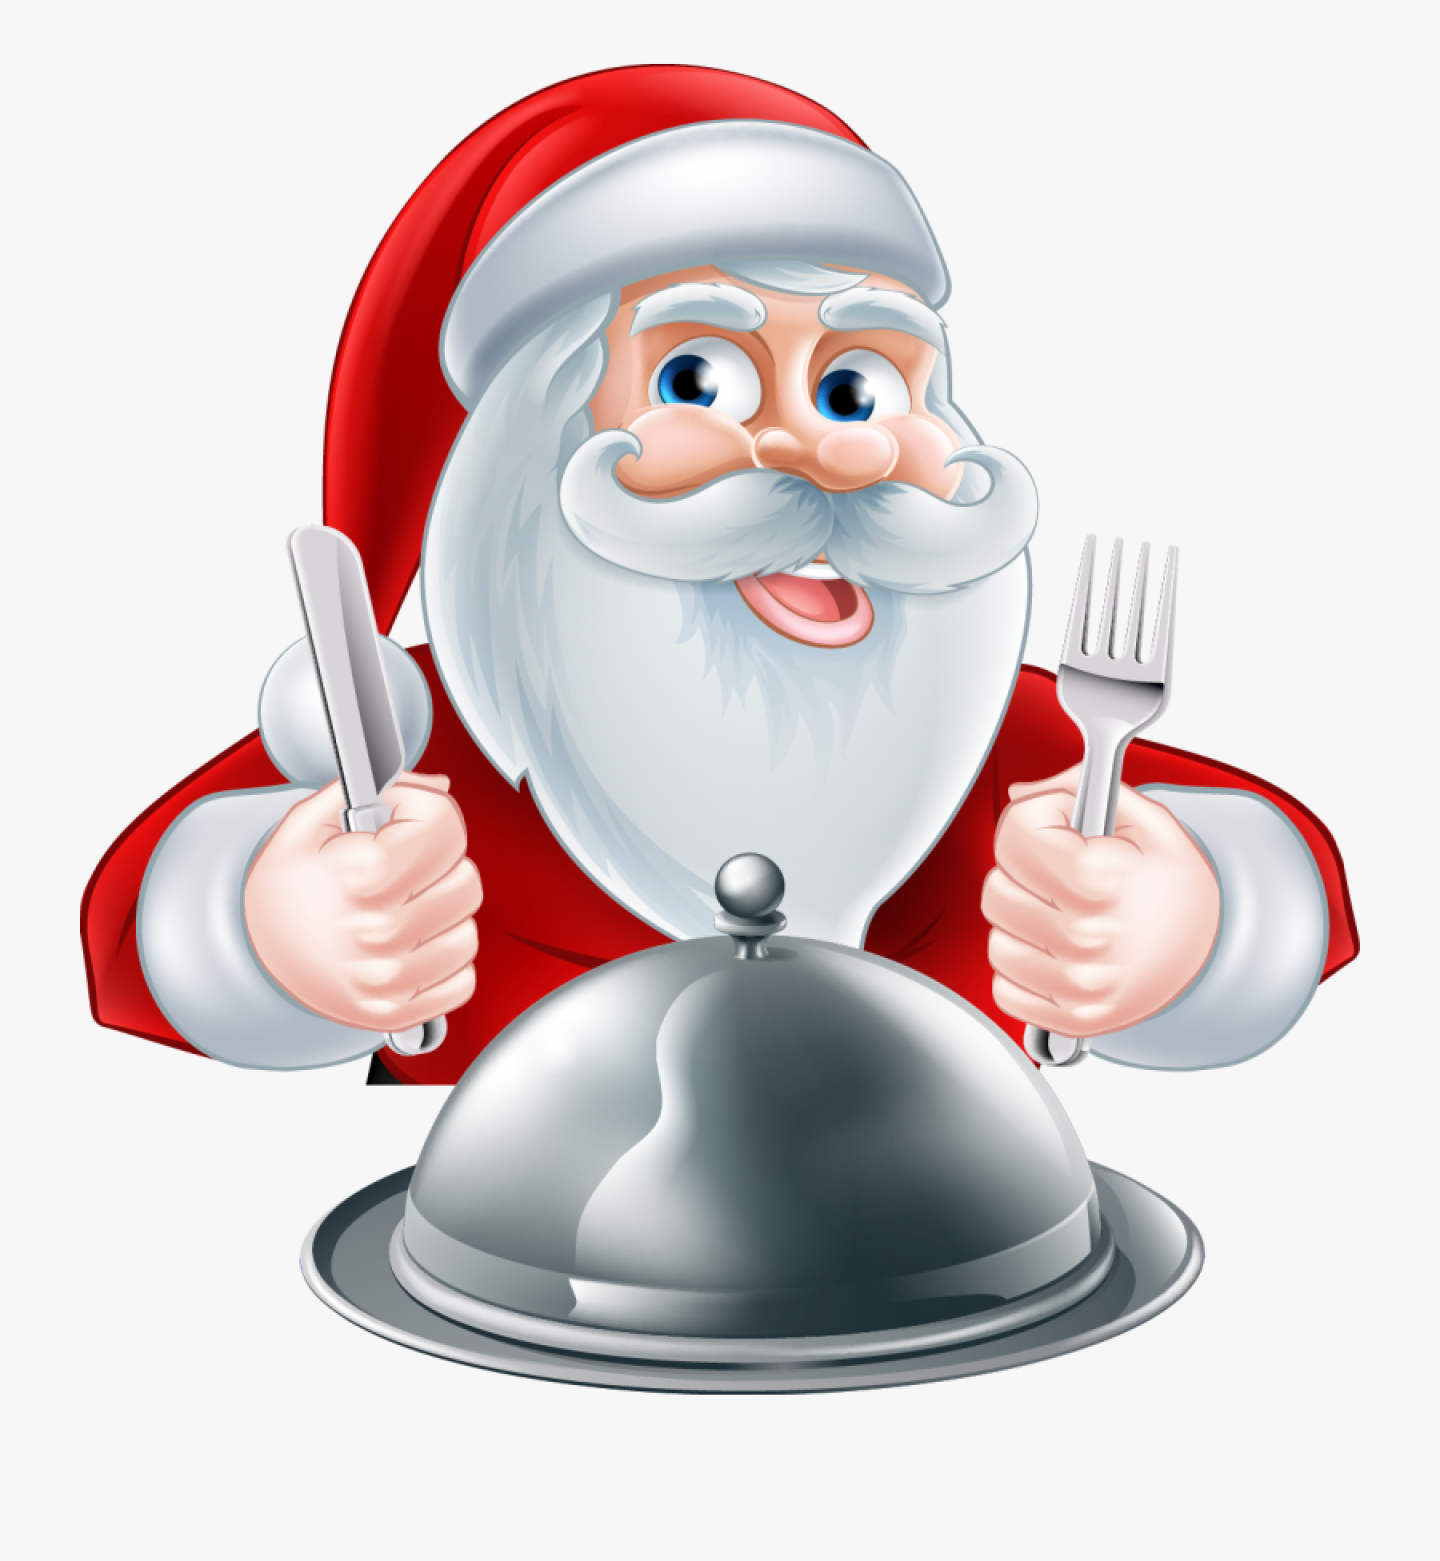 74-740461_eat-clipart-lunch-class-santa-claus-eating-png